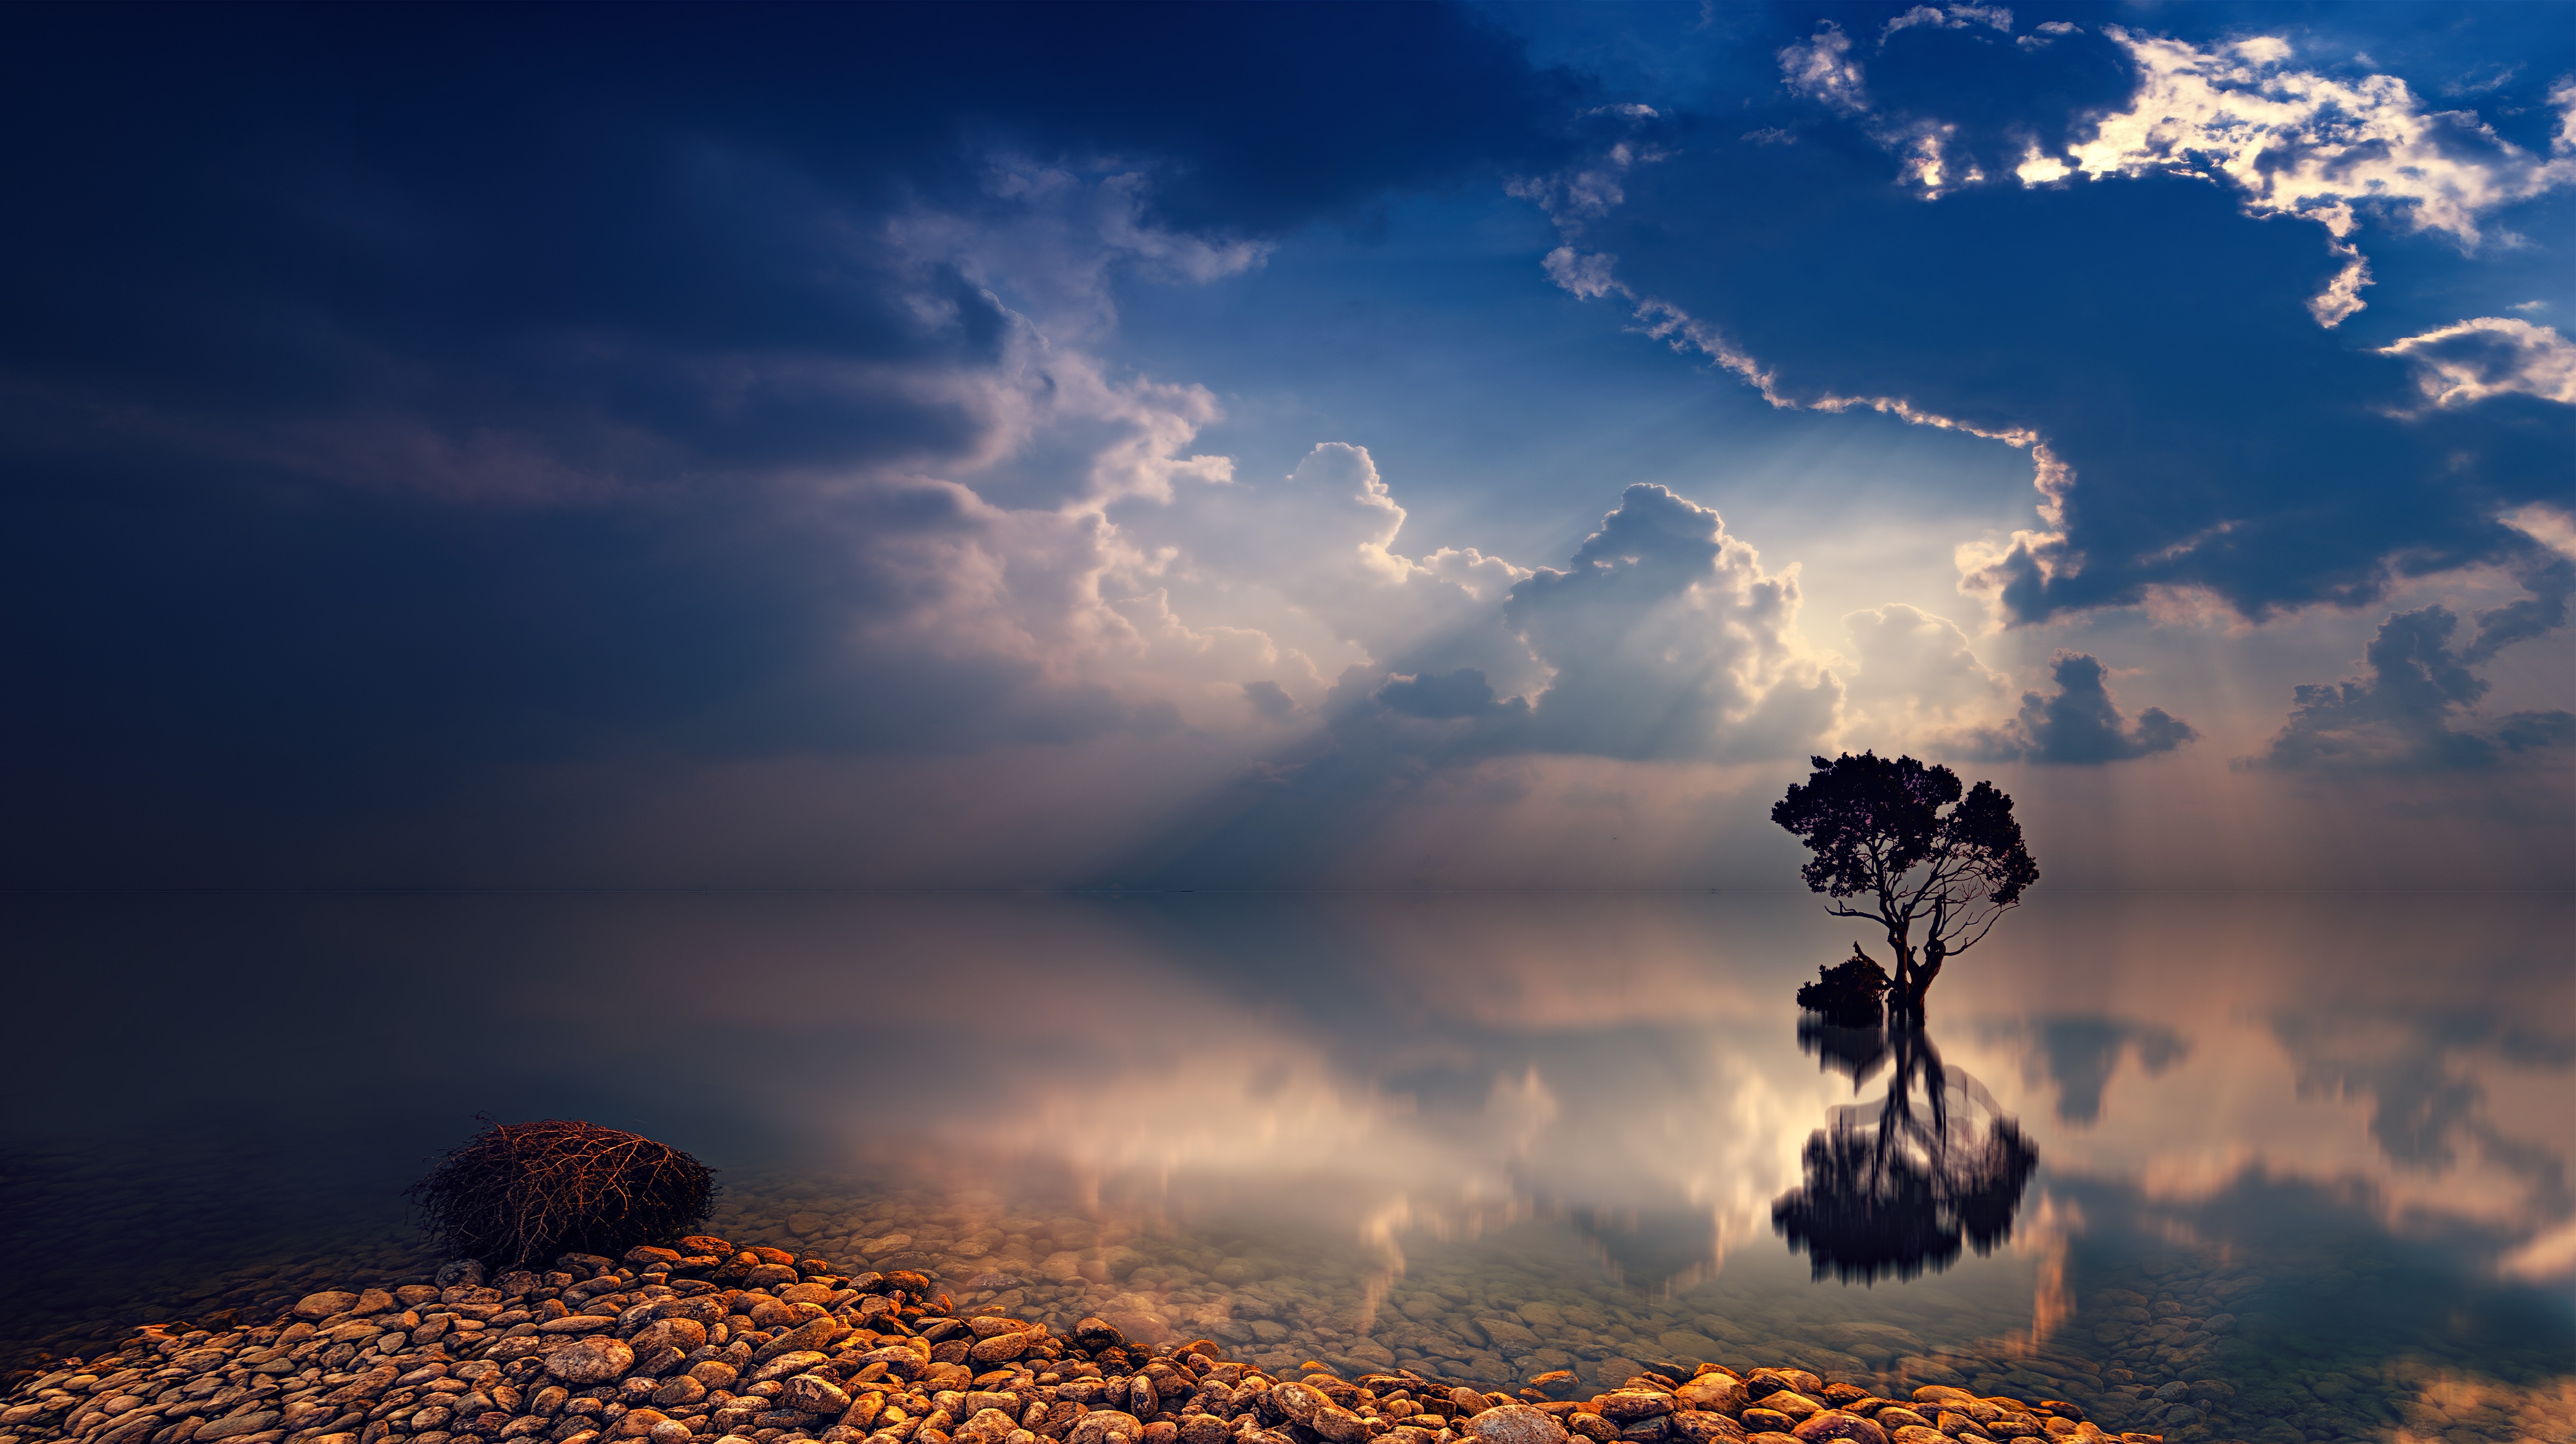 nature, trees, stone, earth, tree, cloud, lonely tree, ocean, reflection, sunbeam, twilight cellphone